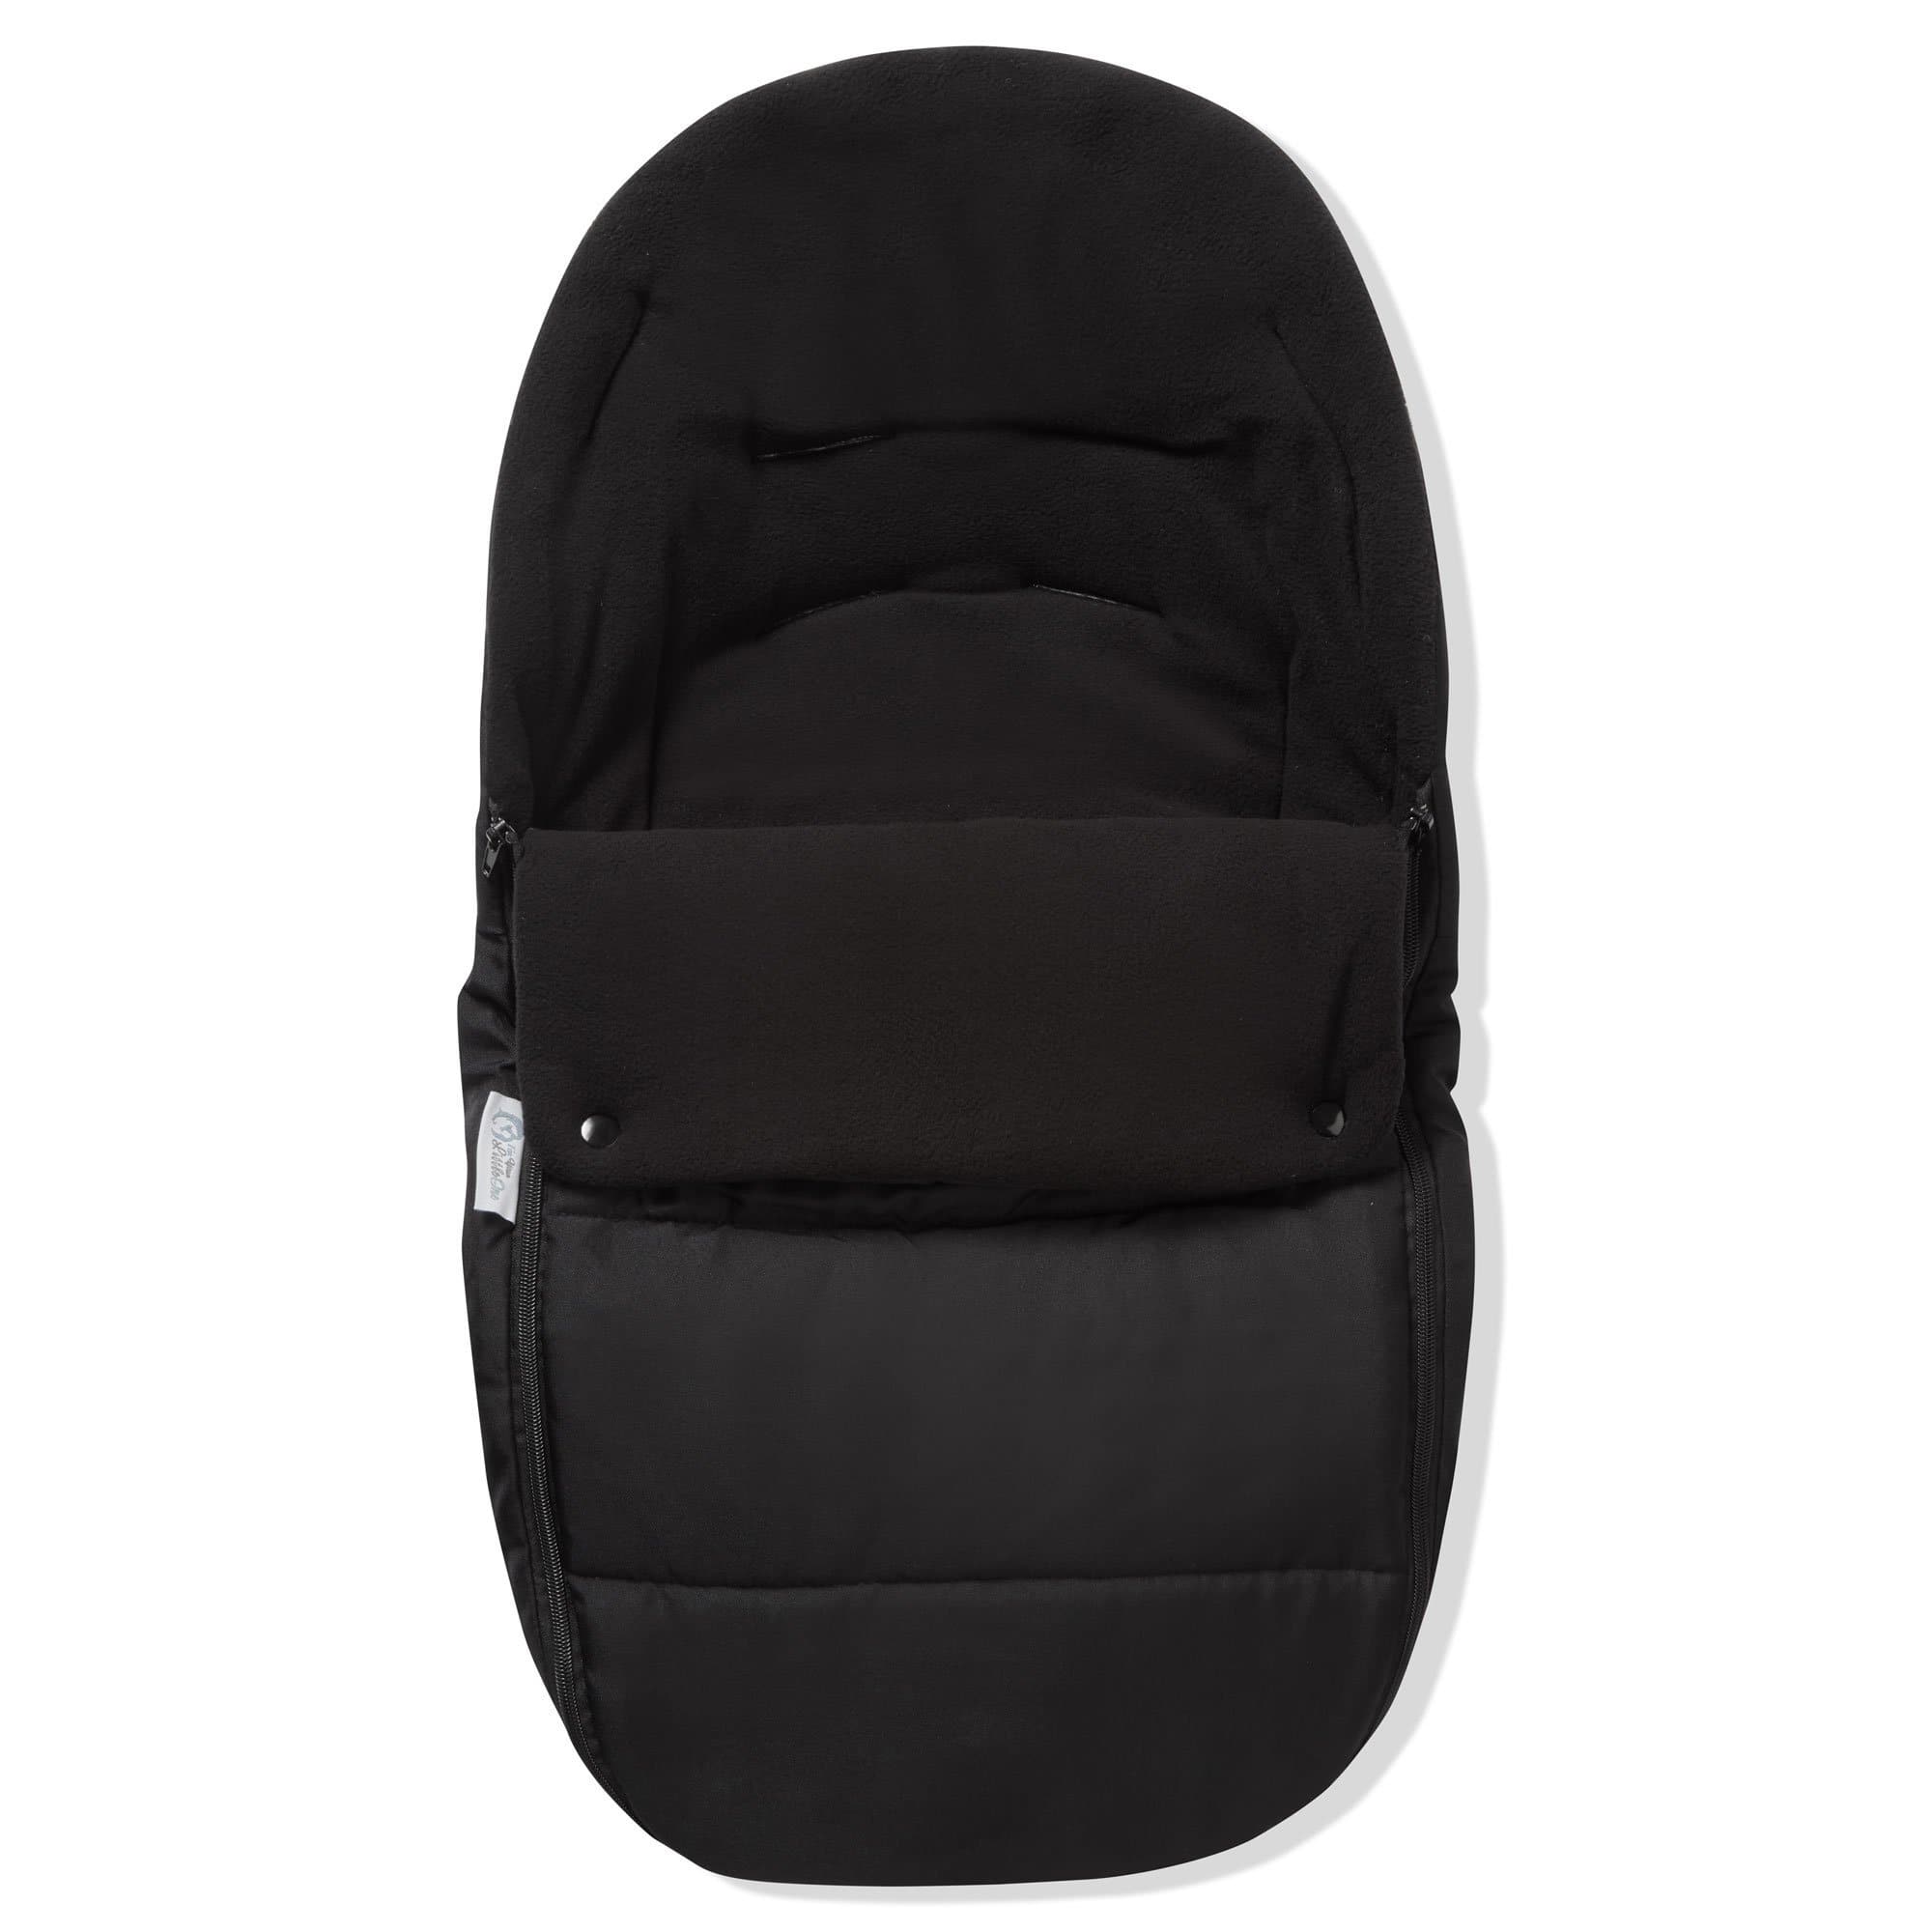 Premium Car Seat Footmuff / Cosy Toes Compatible with Joie - Black Jack / Fits All Models | For Your Little One